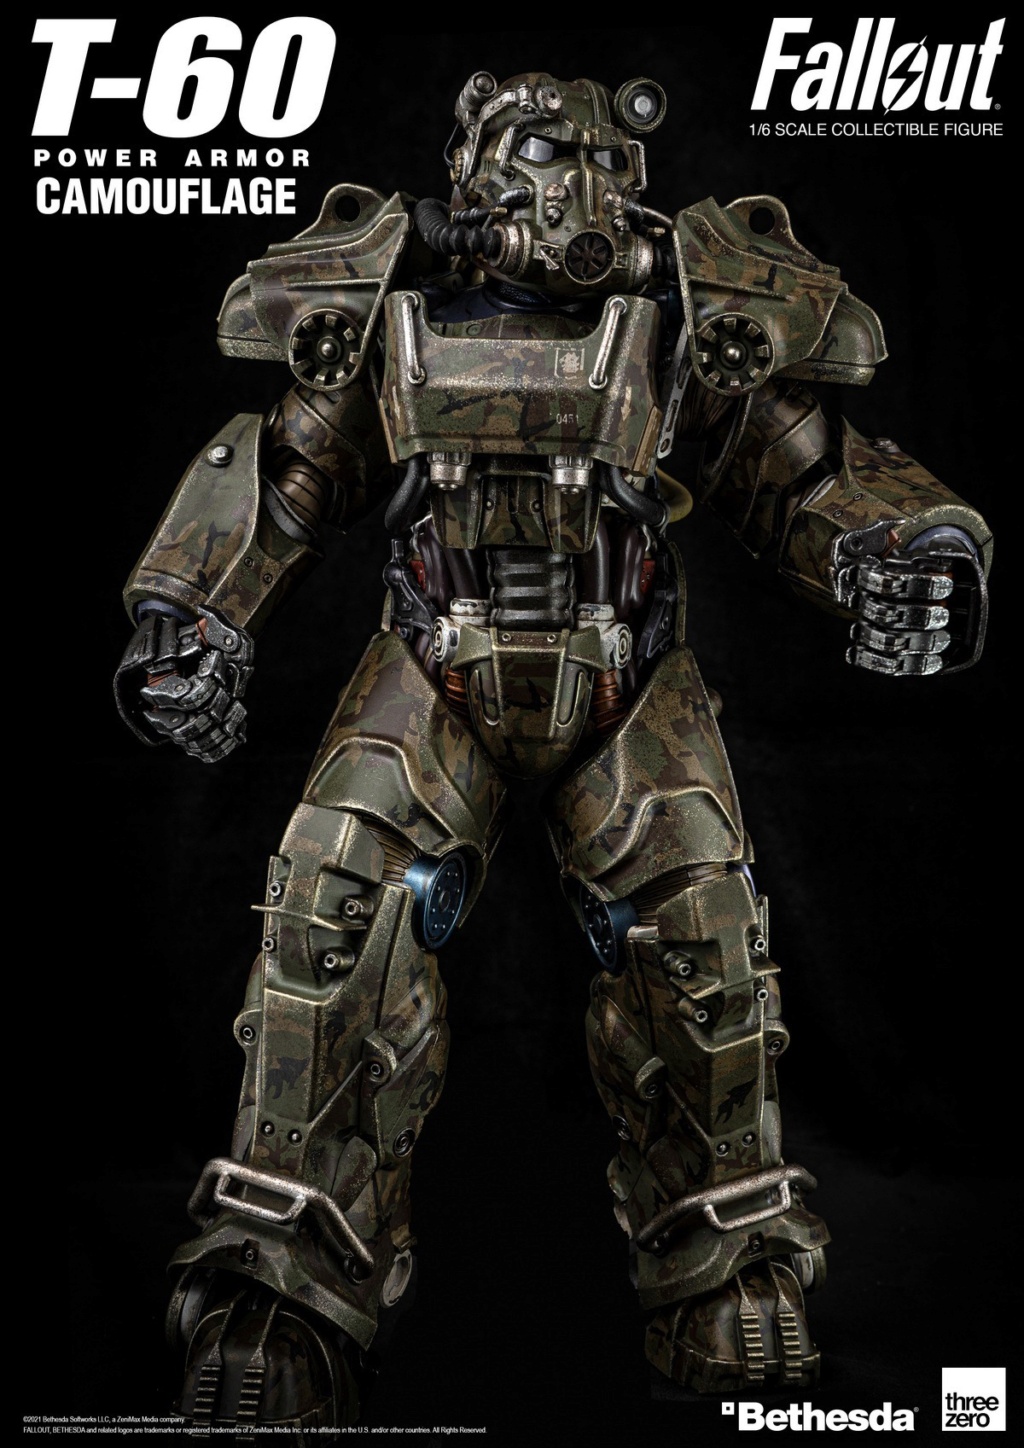 NEW PRODUCT: Threezero: 1/6 Fallout: Remaining Dust/Radiation Series-T-60 Power Armor Action Figure Cef2d610